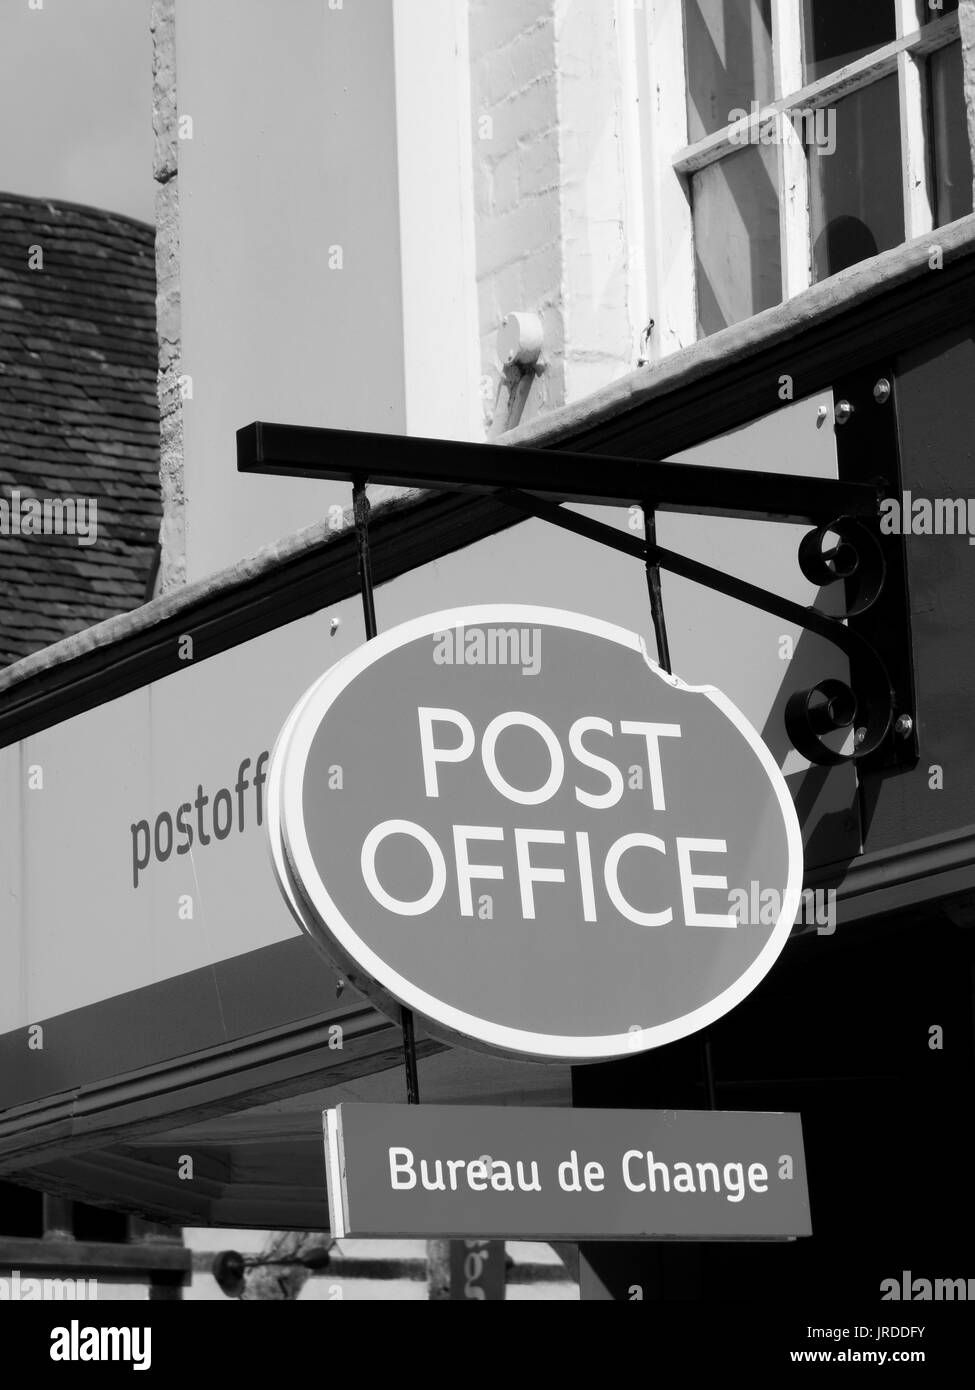 Post Office sign over premises with bureau de change currency services available Stock Photo